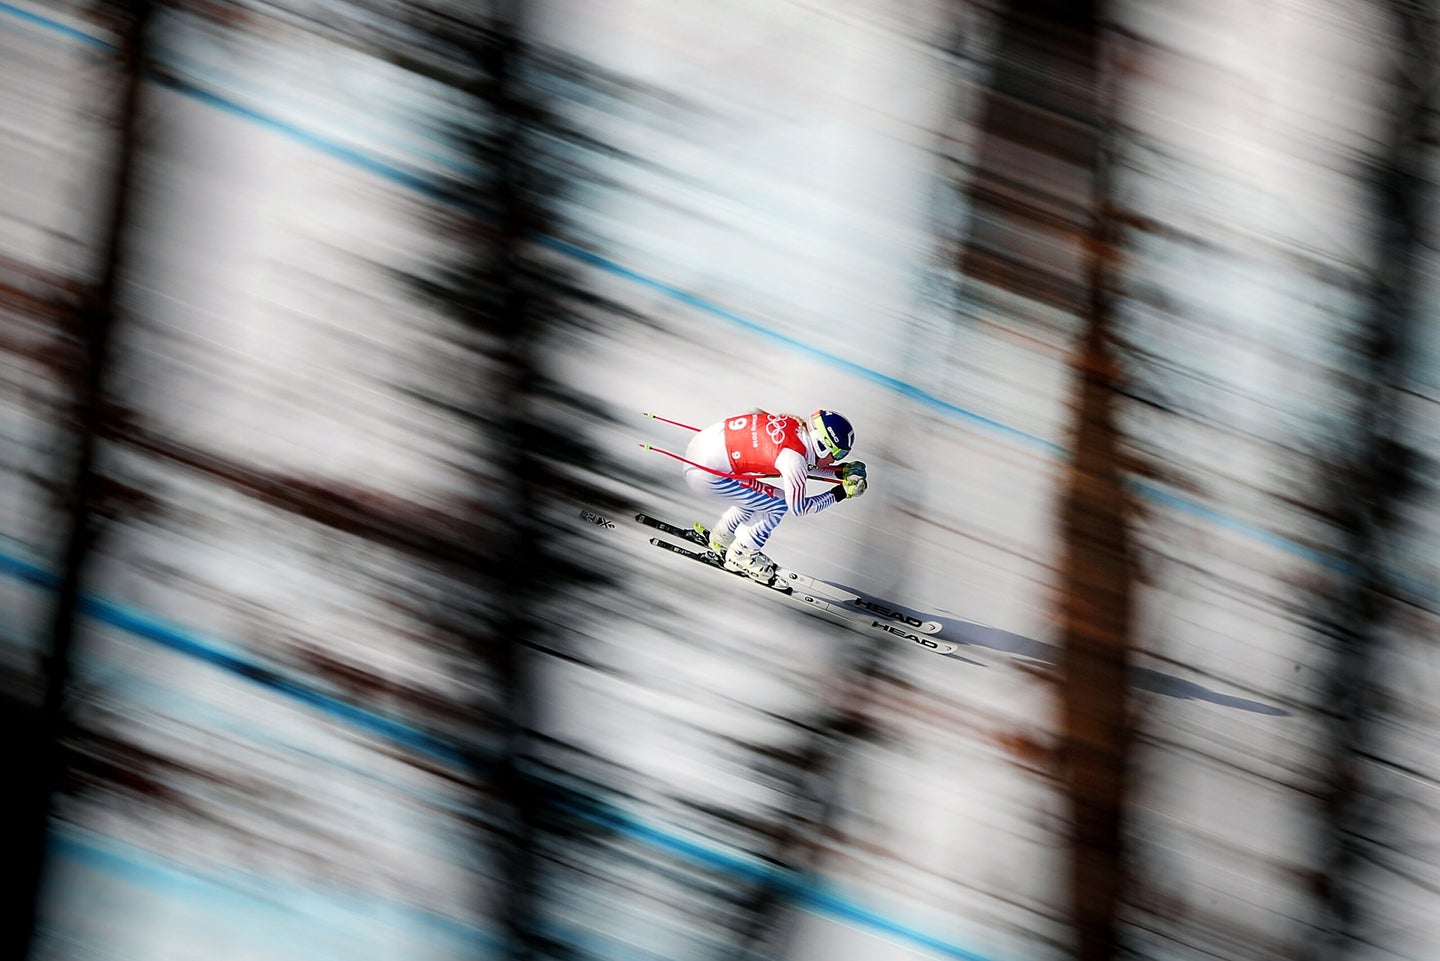 Lindsey Vonn of the United States makes a run during Alpine Skiing Ladies' Downhill Training on day 10 of the PyeongChang 2018 Winter Olympic Games at Jeongseon Alpine Centre on February 19, 2018 in Pyeongchang-gun, South Korea.